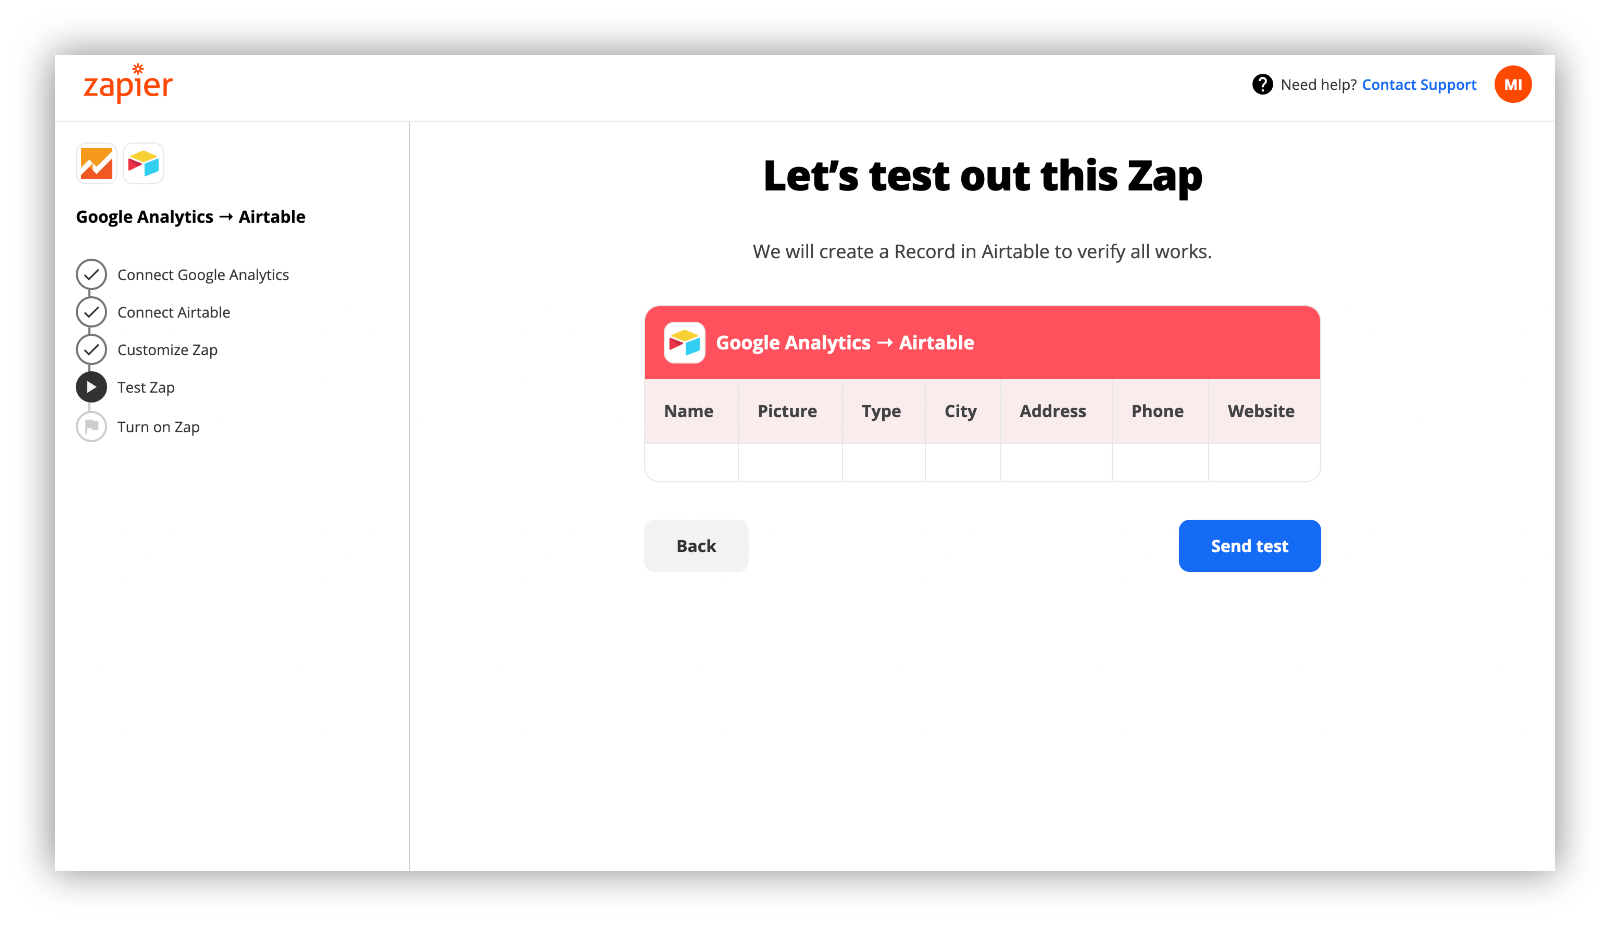 Test out the Zap